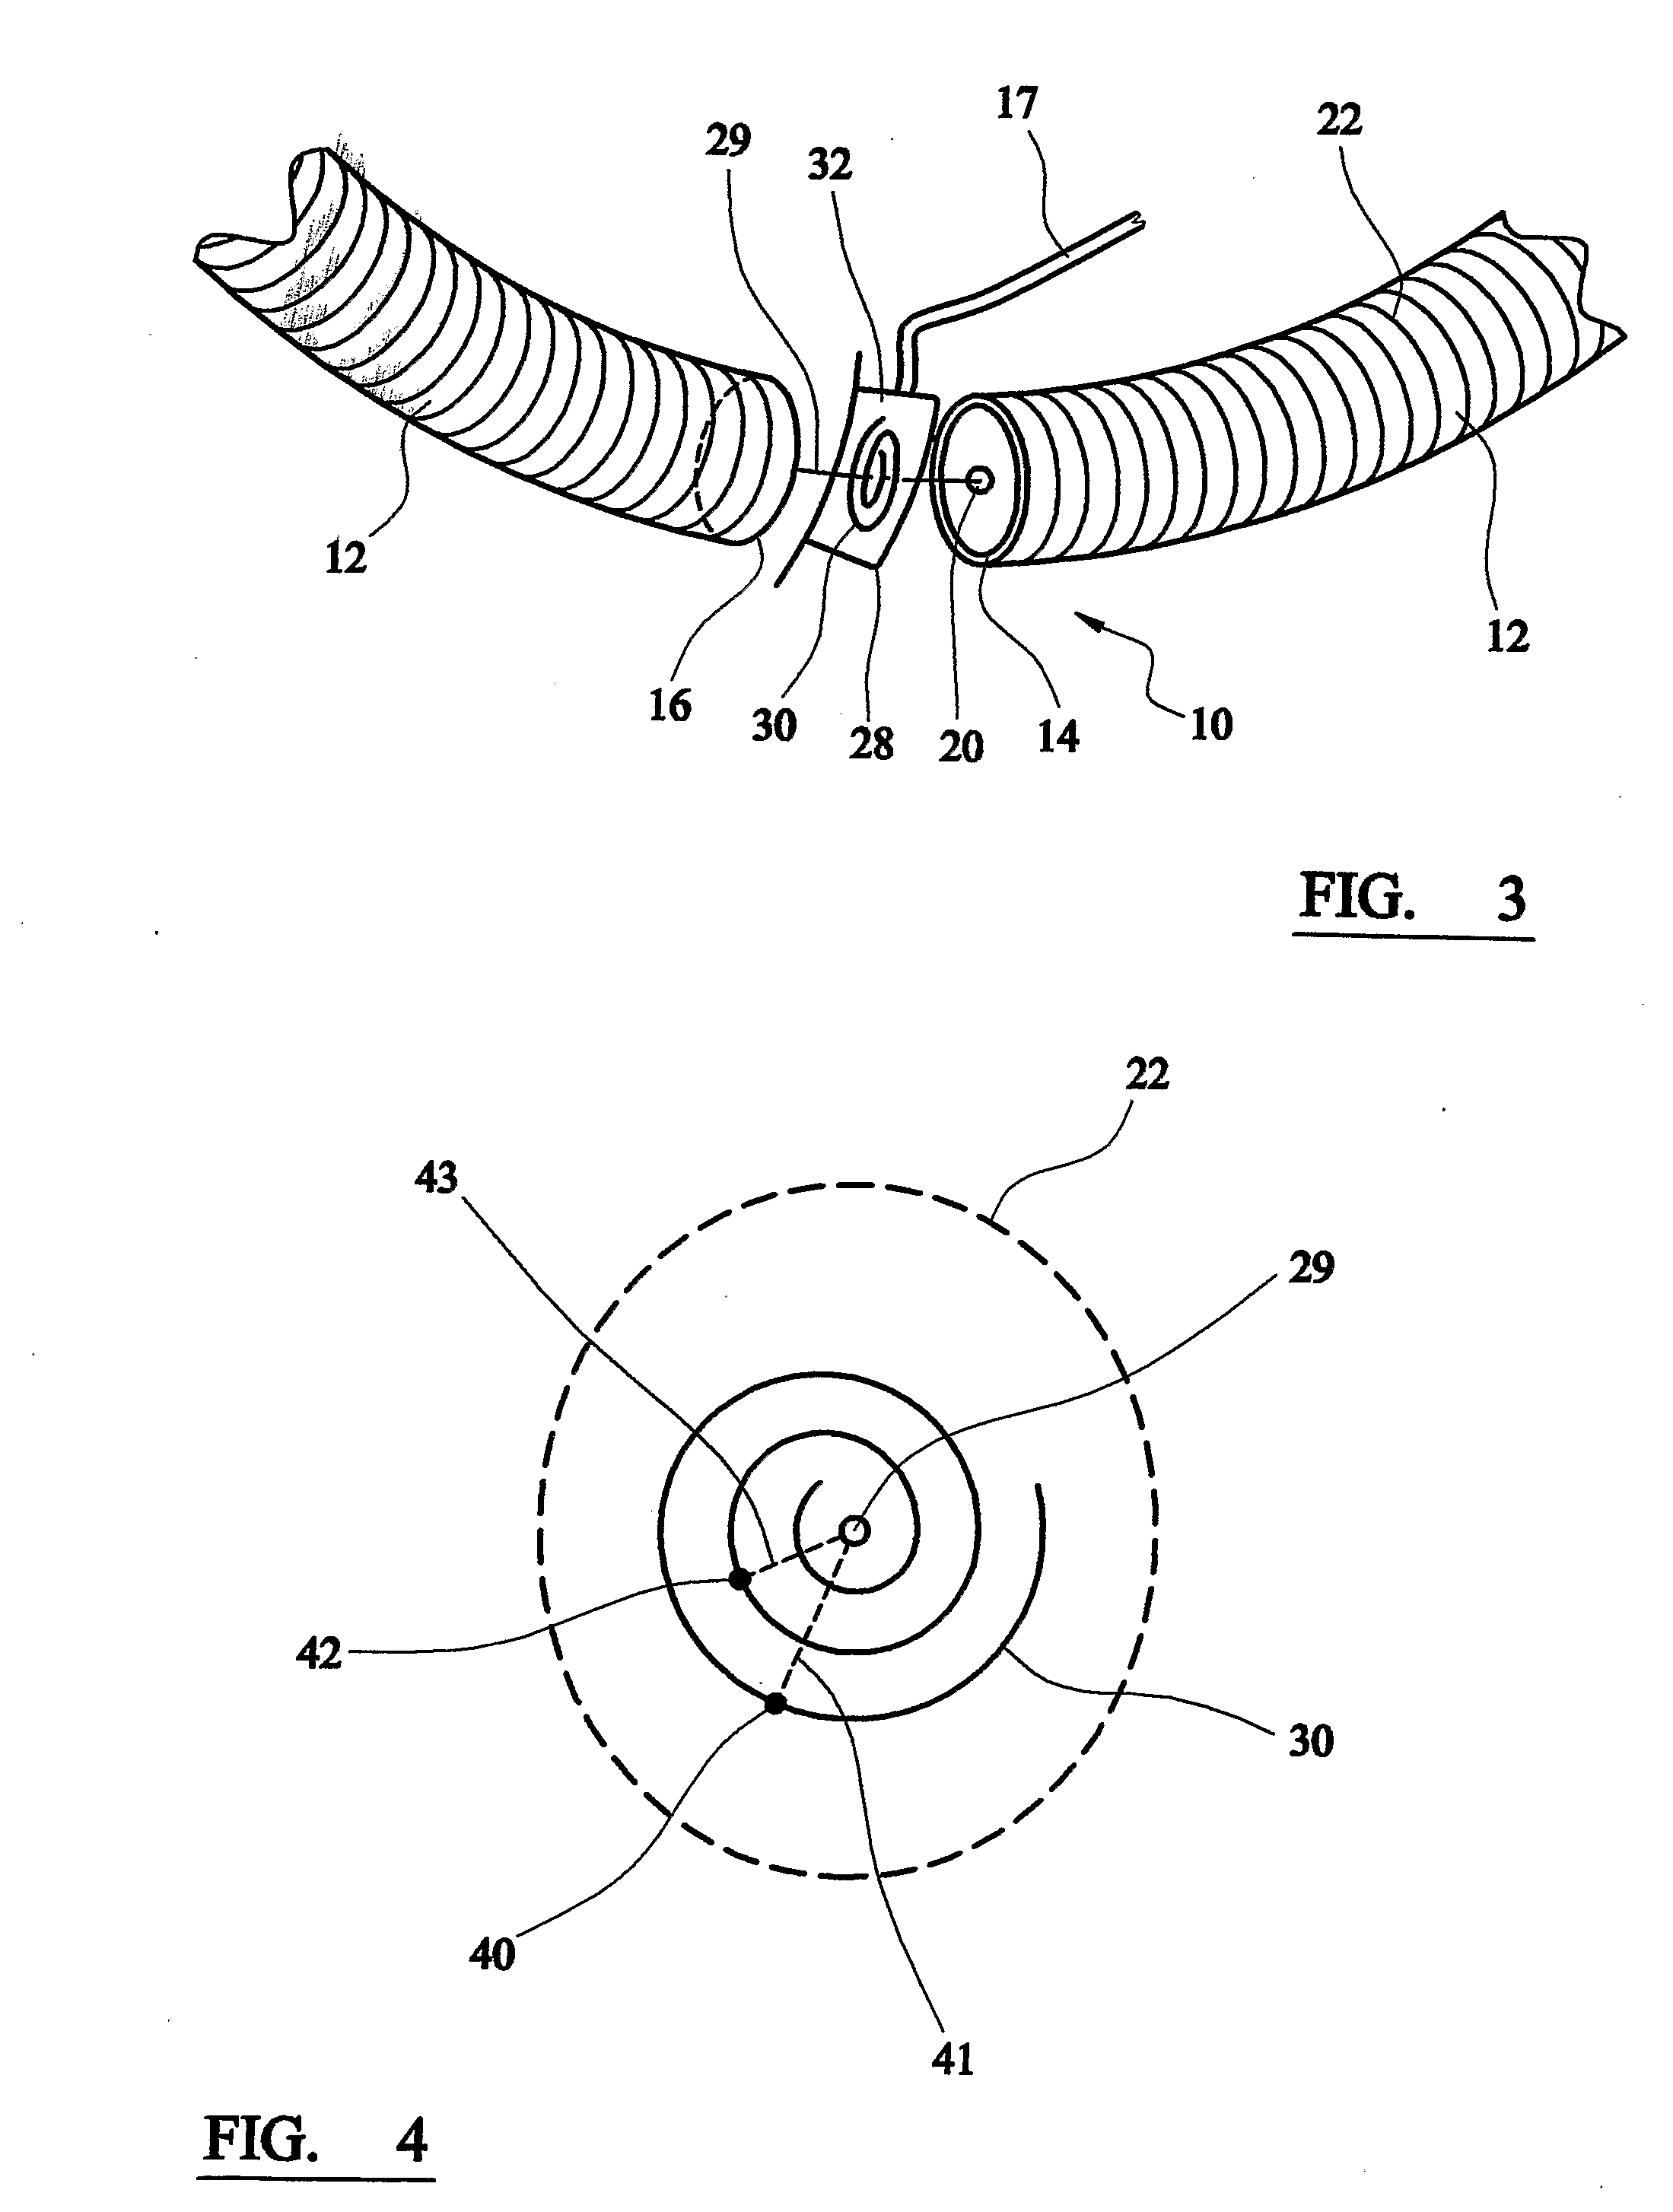 Method and Apparatus for Measuring Current